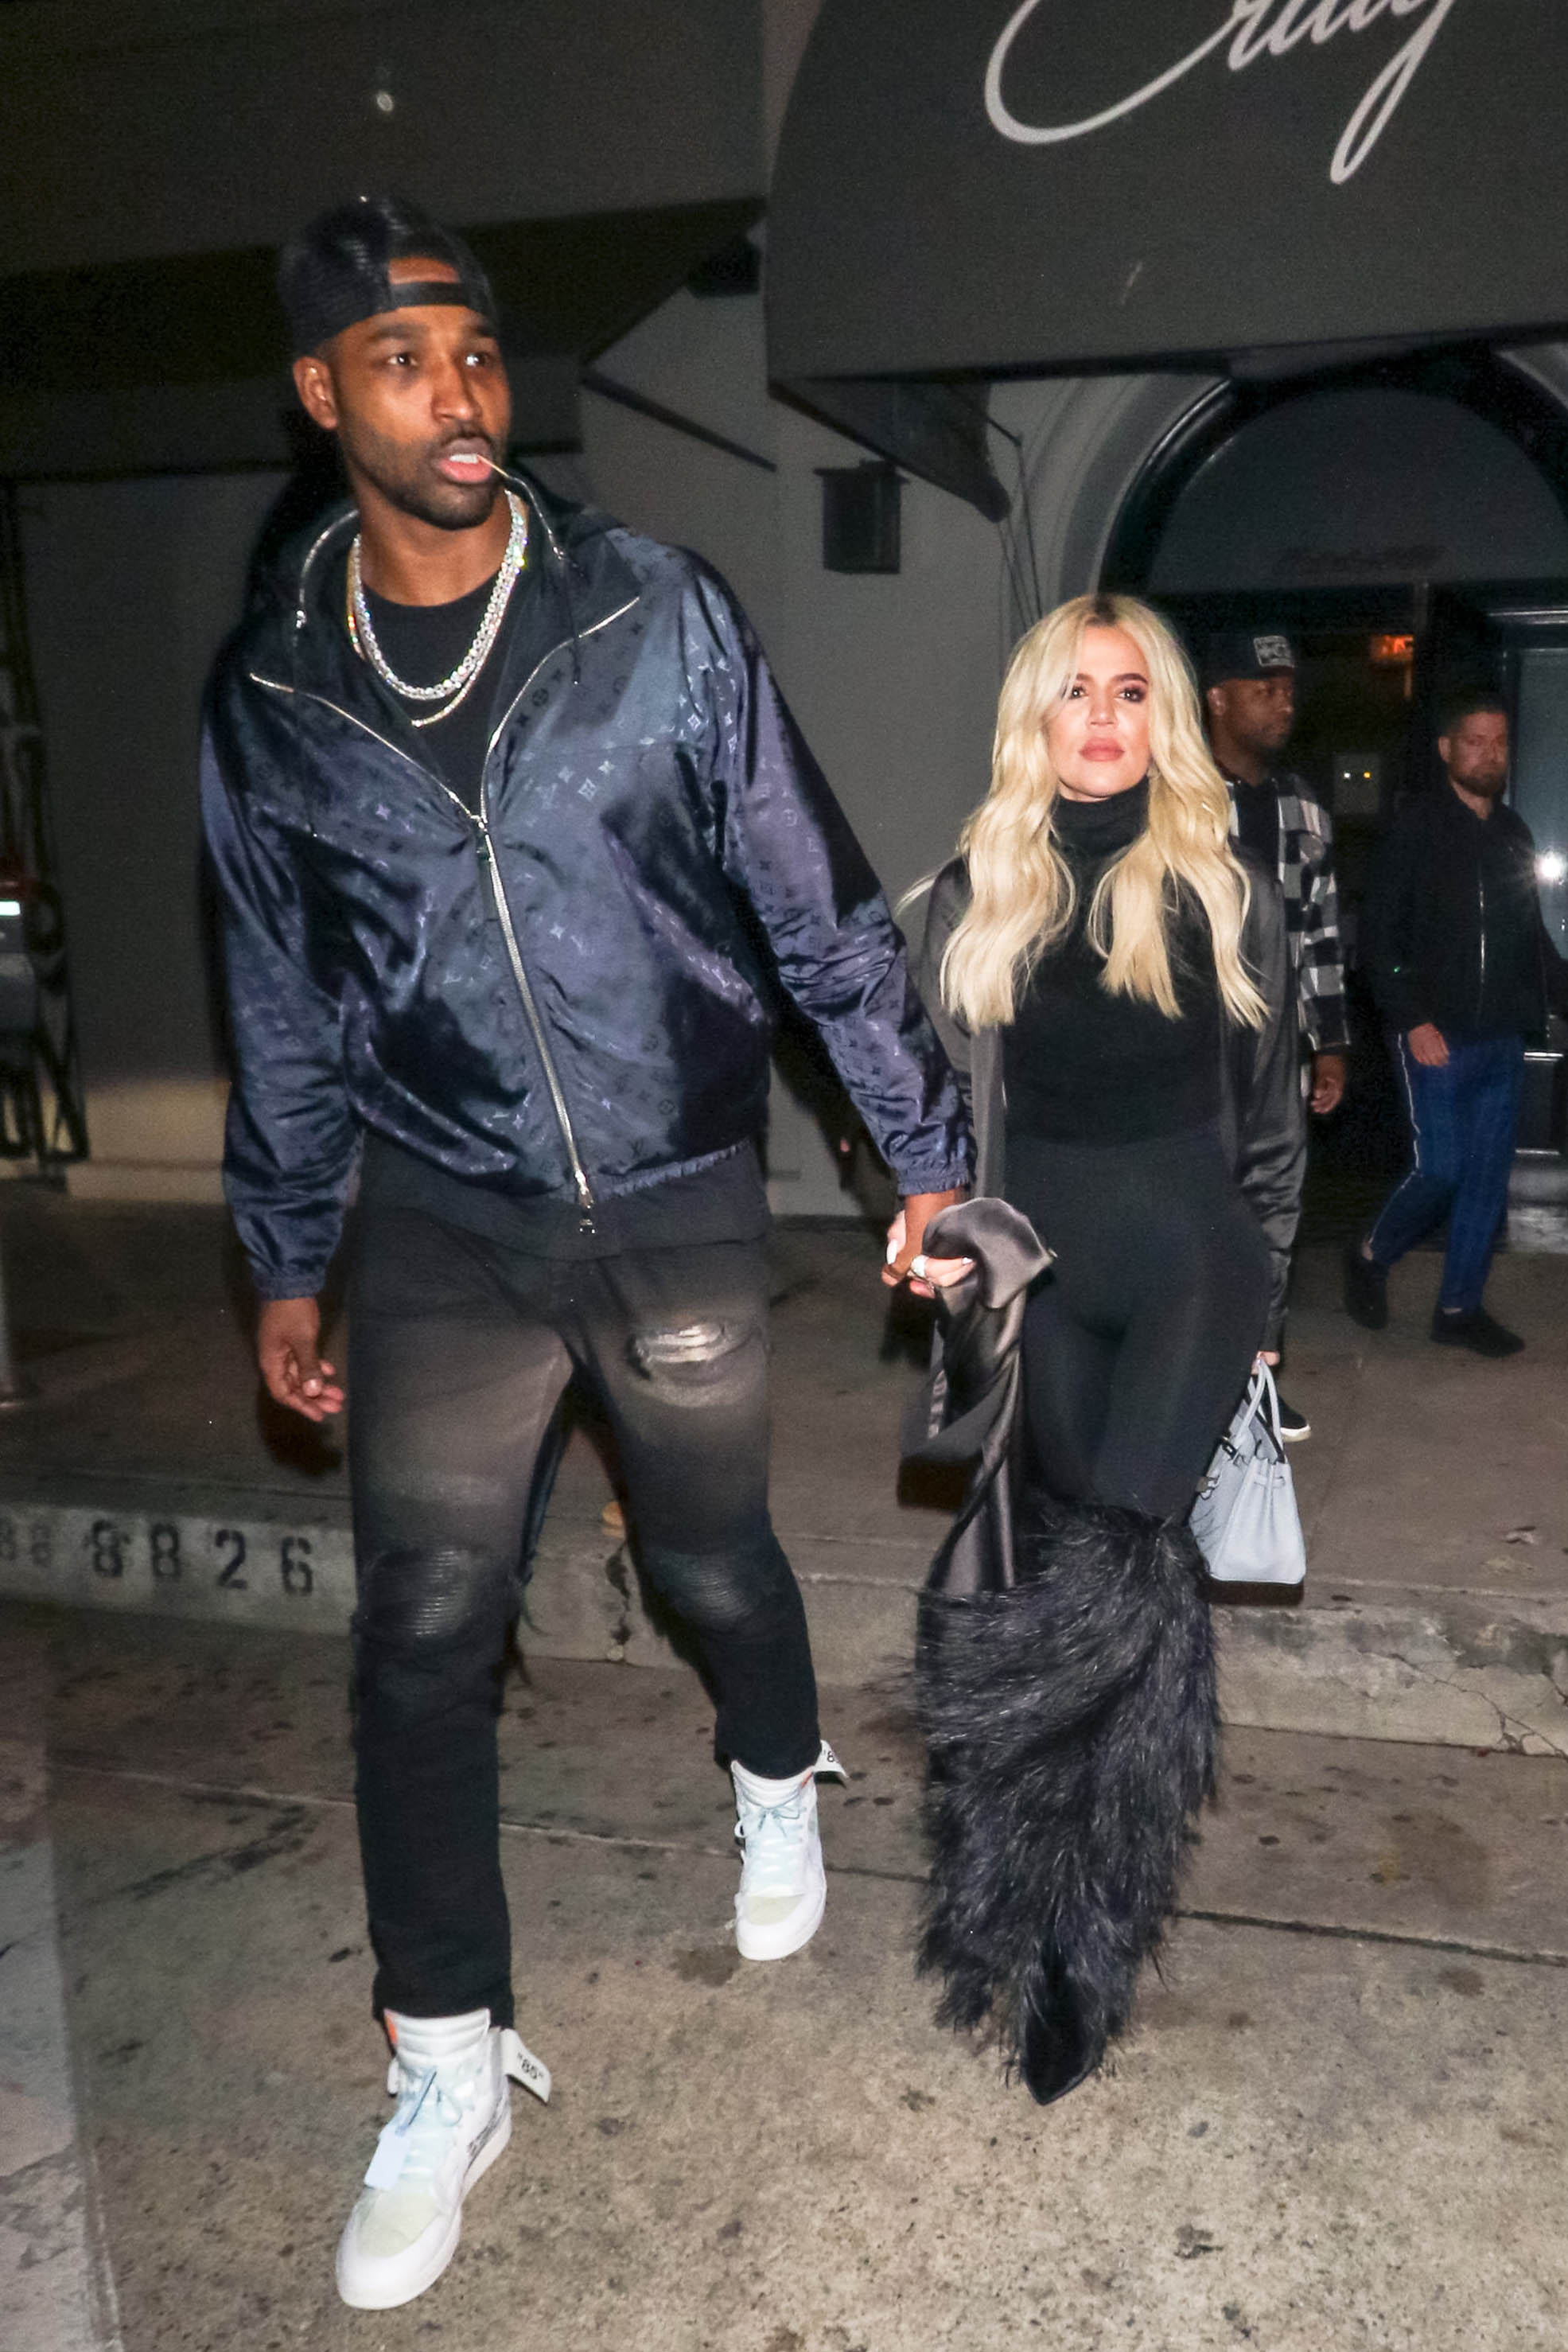 Khloe shares her two children with Tristan Thompson, from whom she split after his cheating scandals came to light